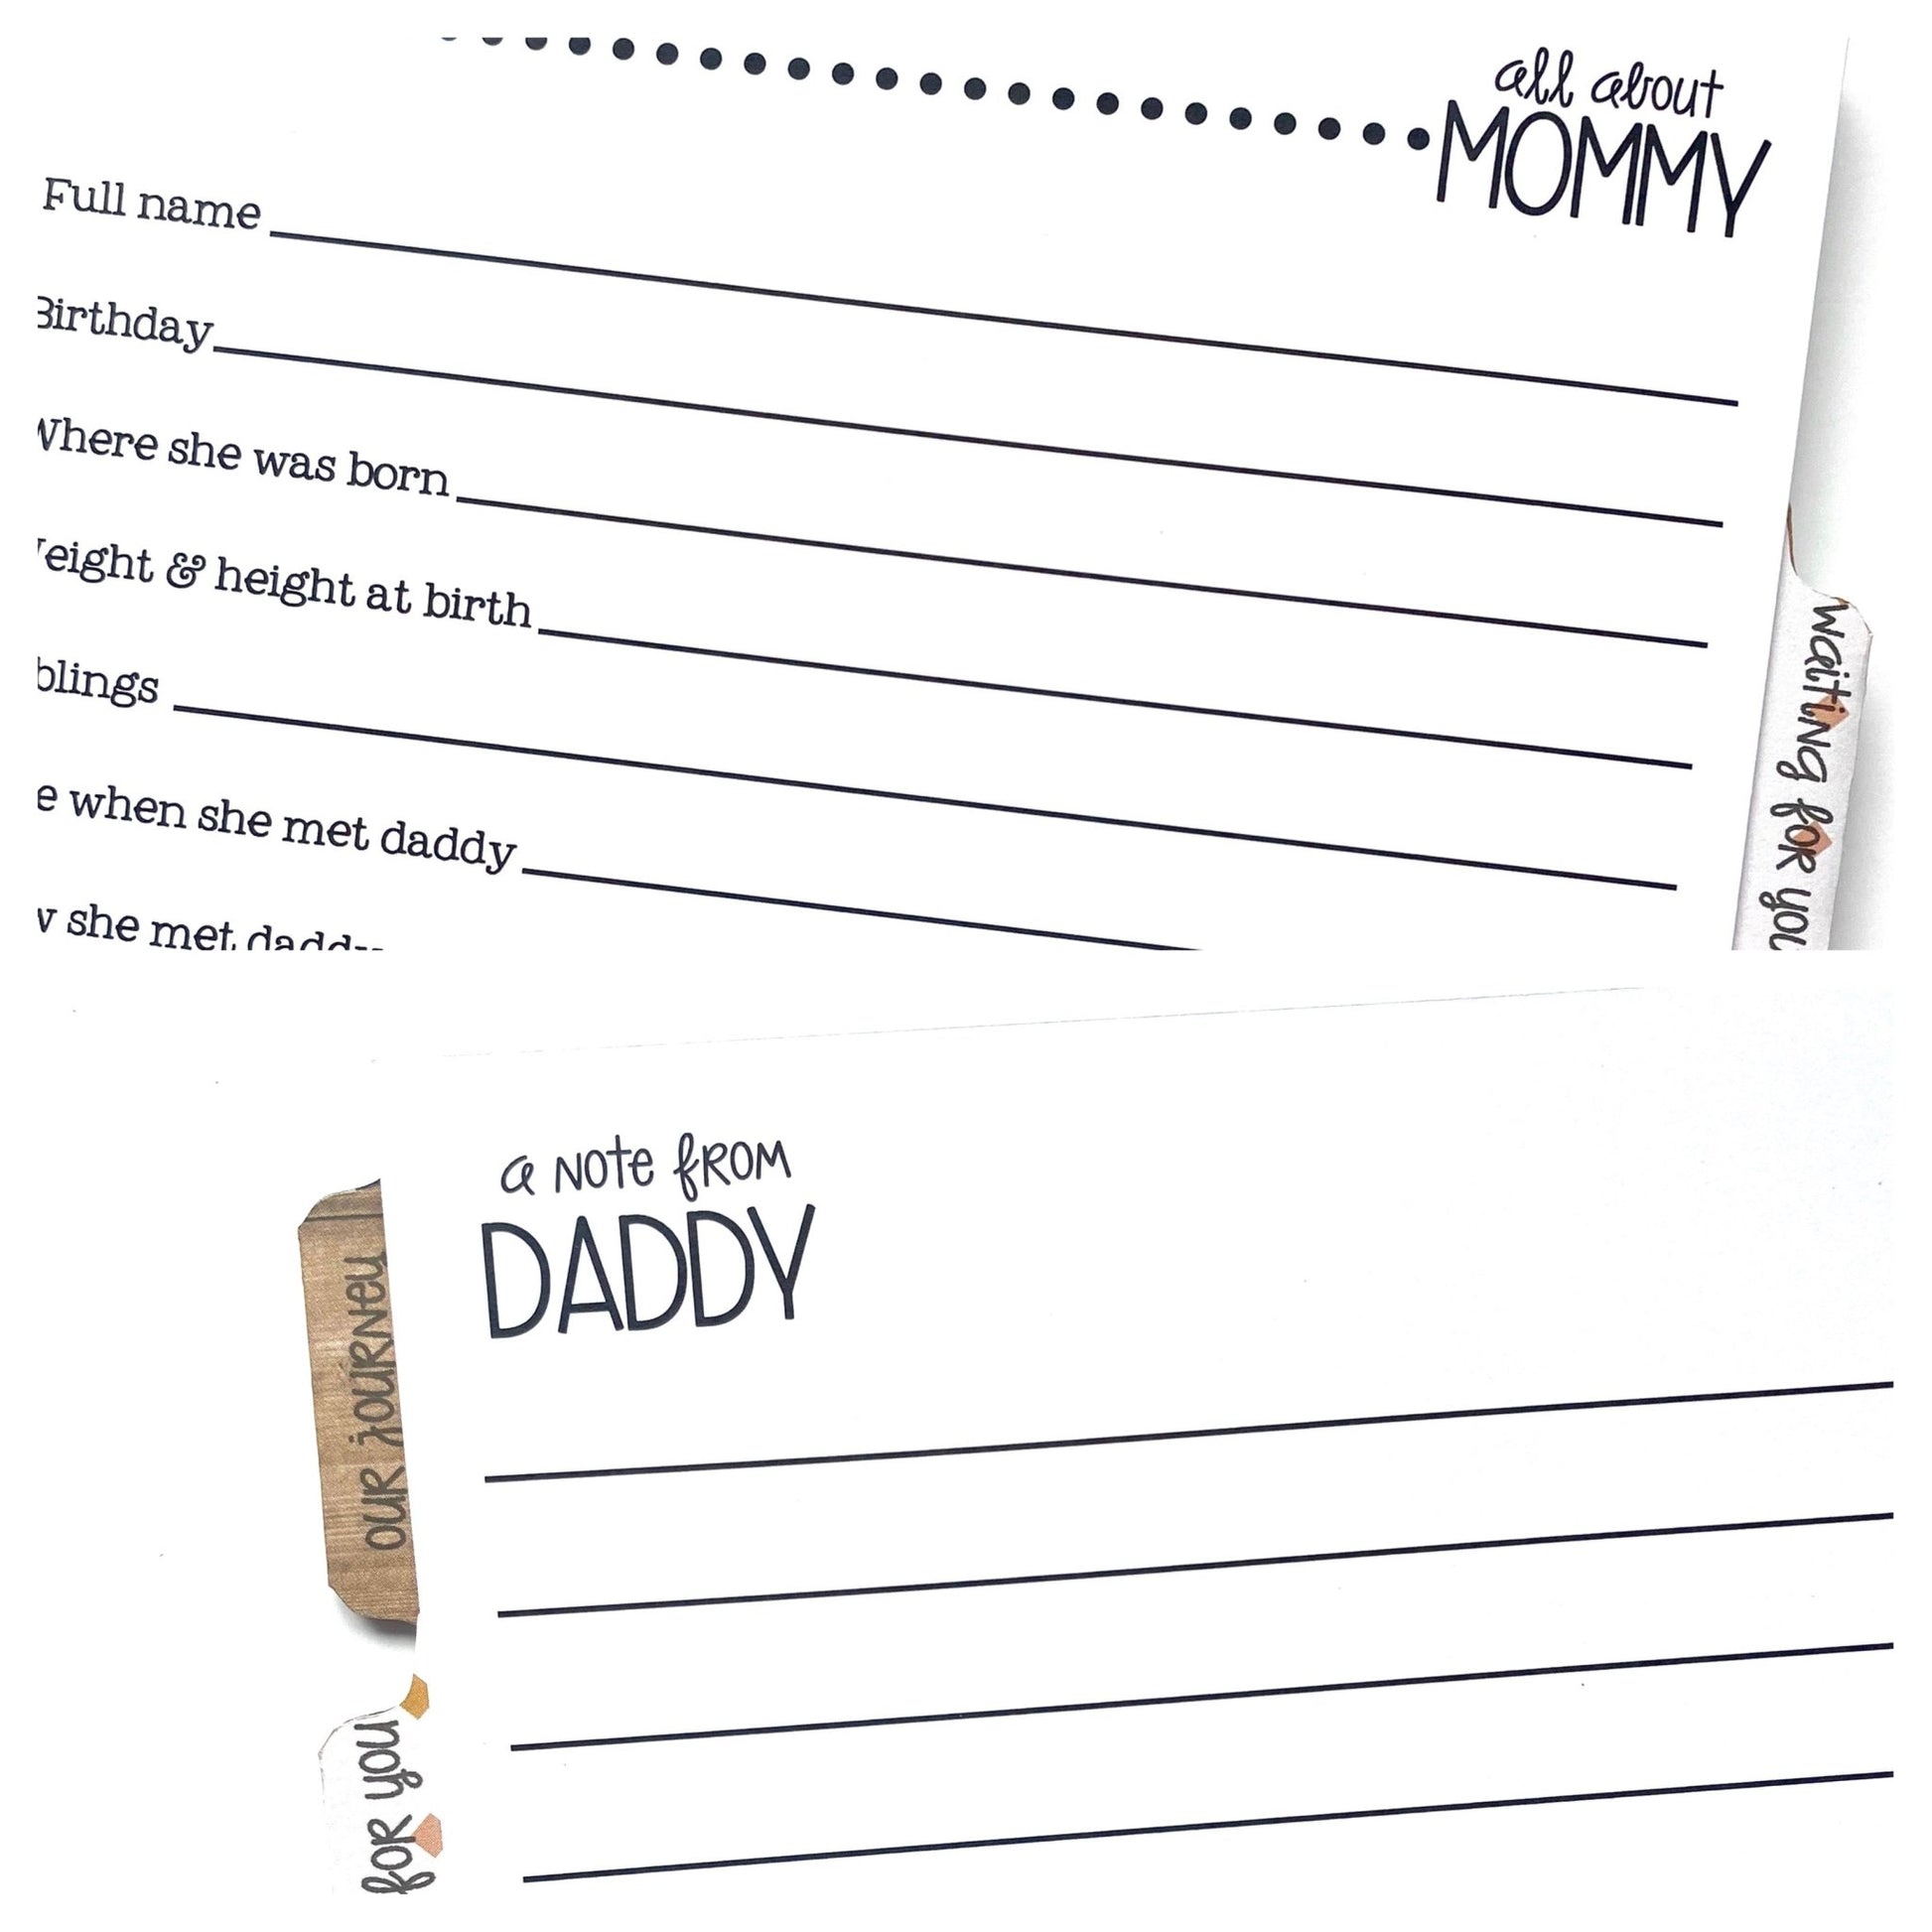 an all about mommy page and a note from daddy page